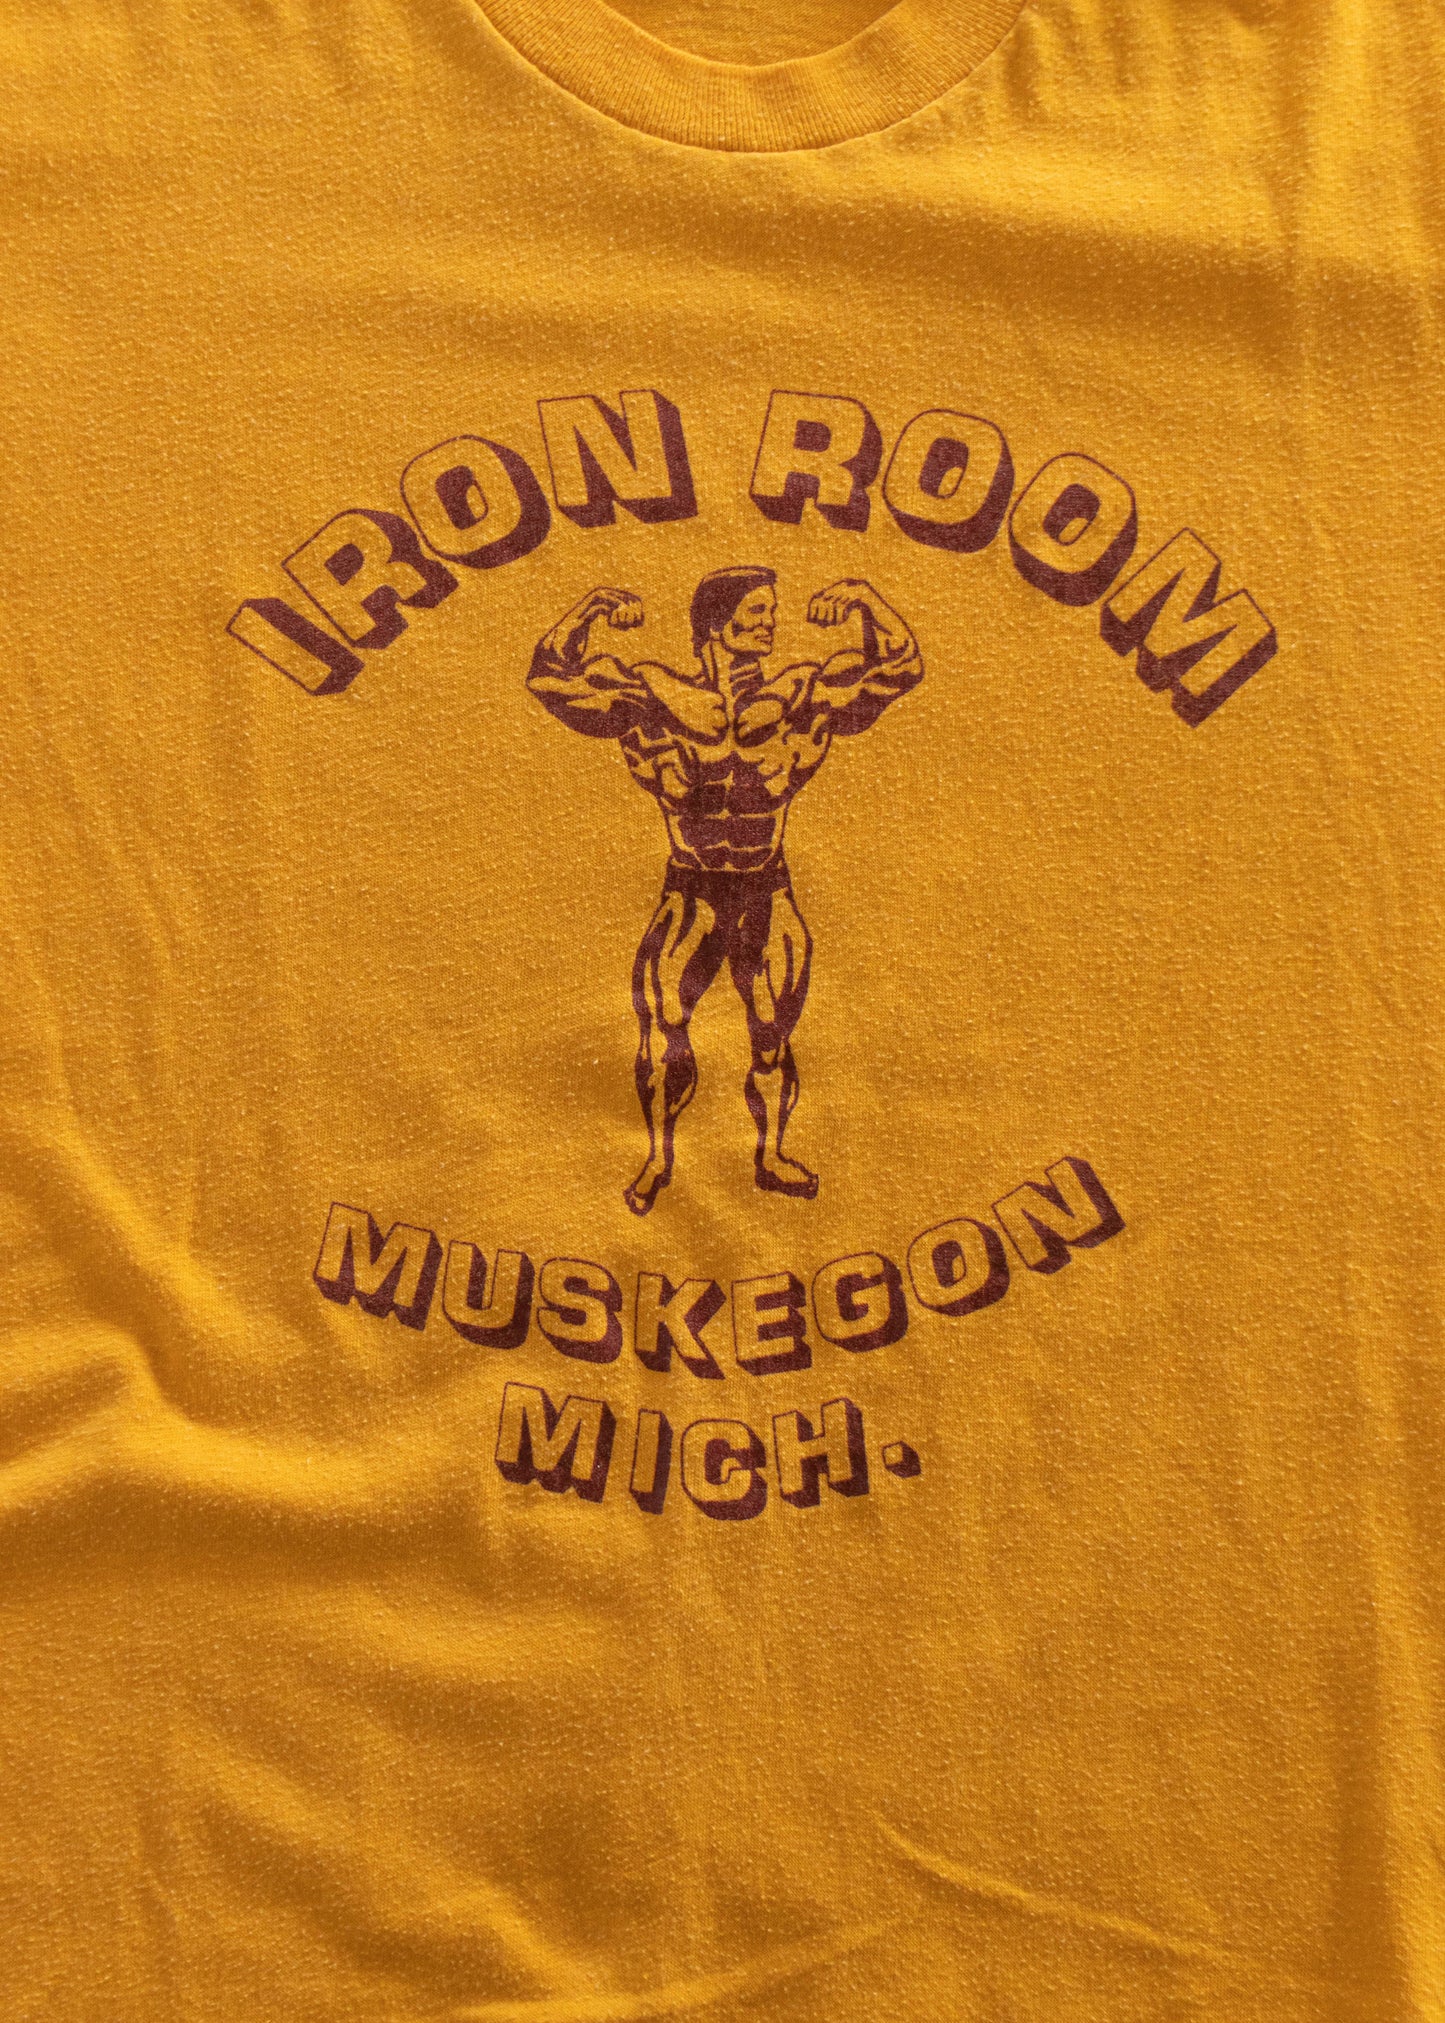 1980s Iron Room T-Shirt Size S/M